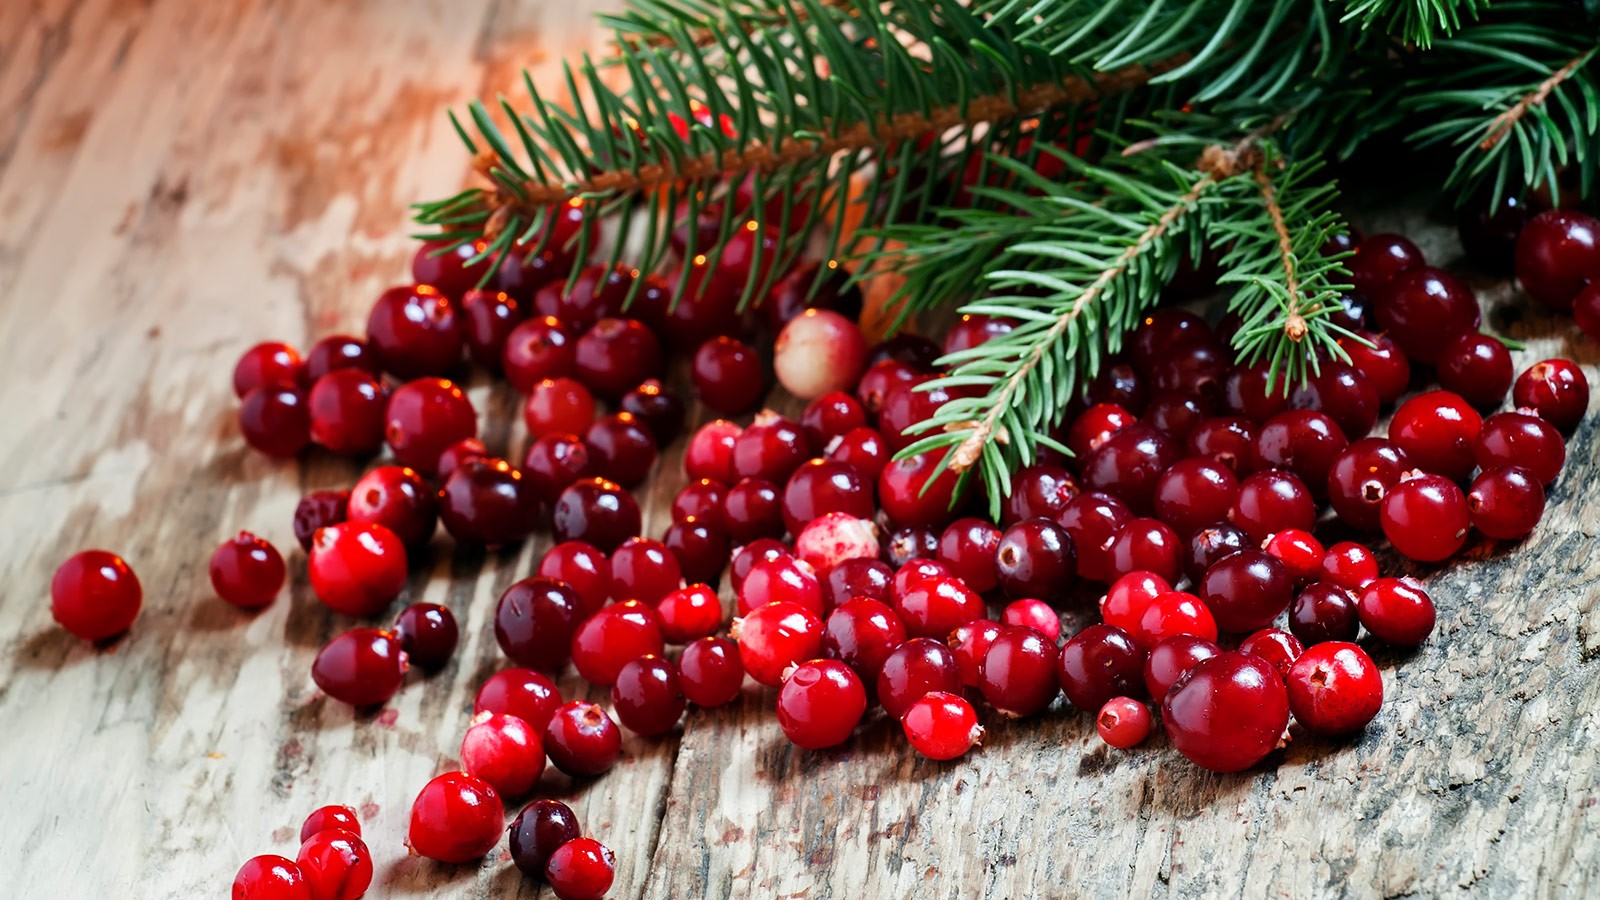 Ask an Expert - Cranberries: A Healthy Holiday Choice